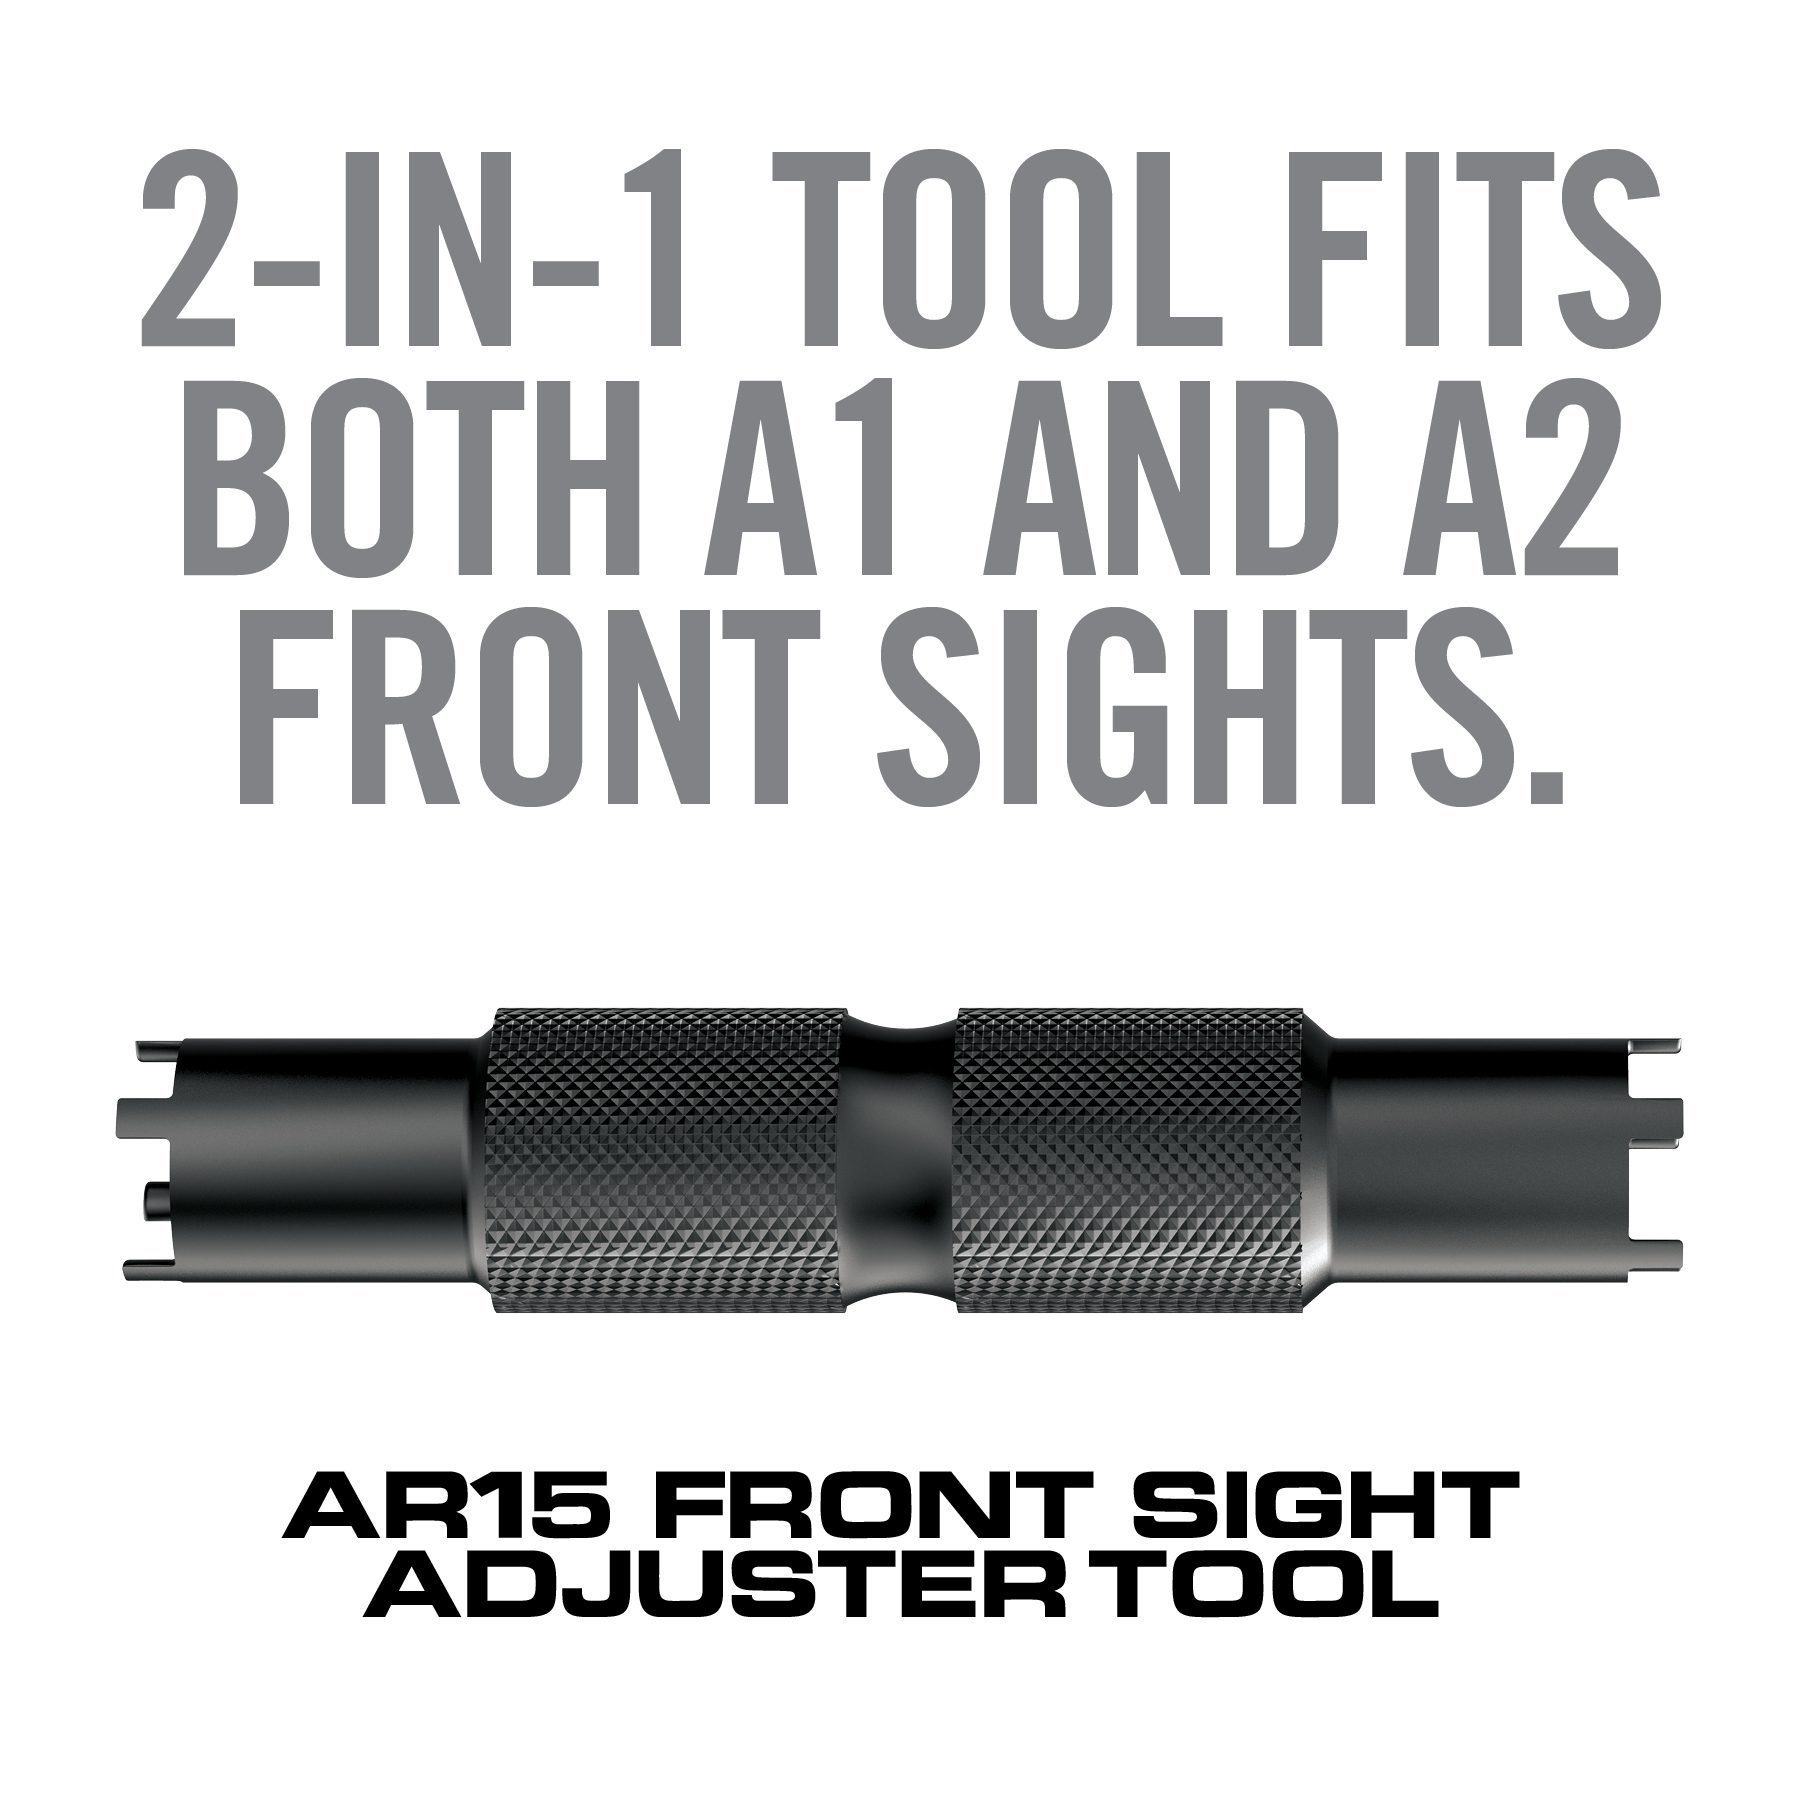 an advertisement for the ar 15 front sight